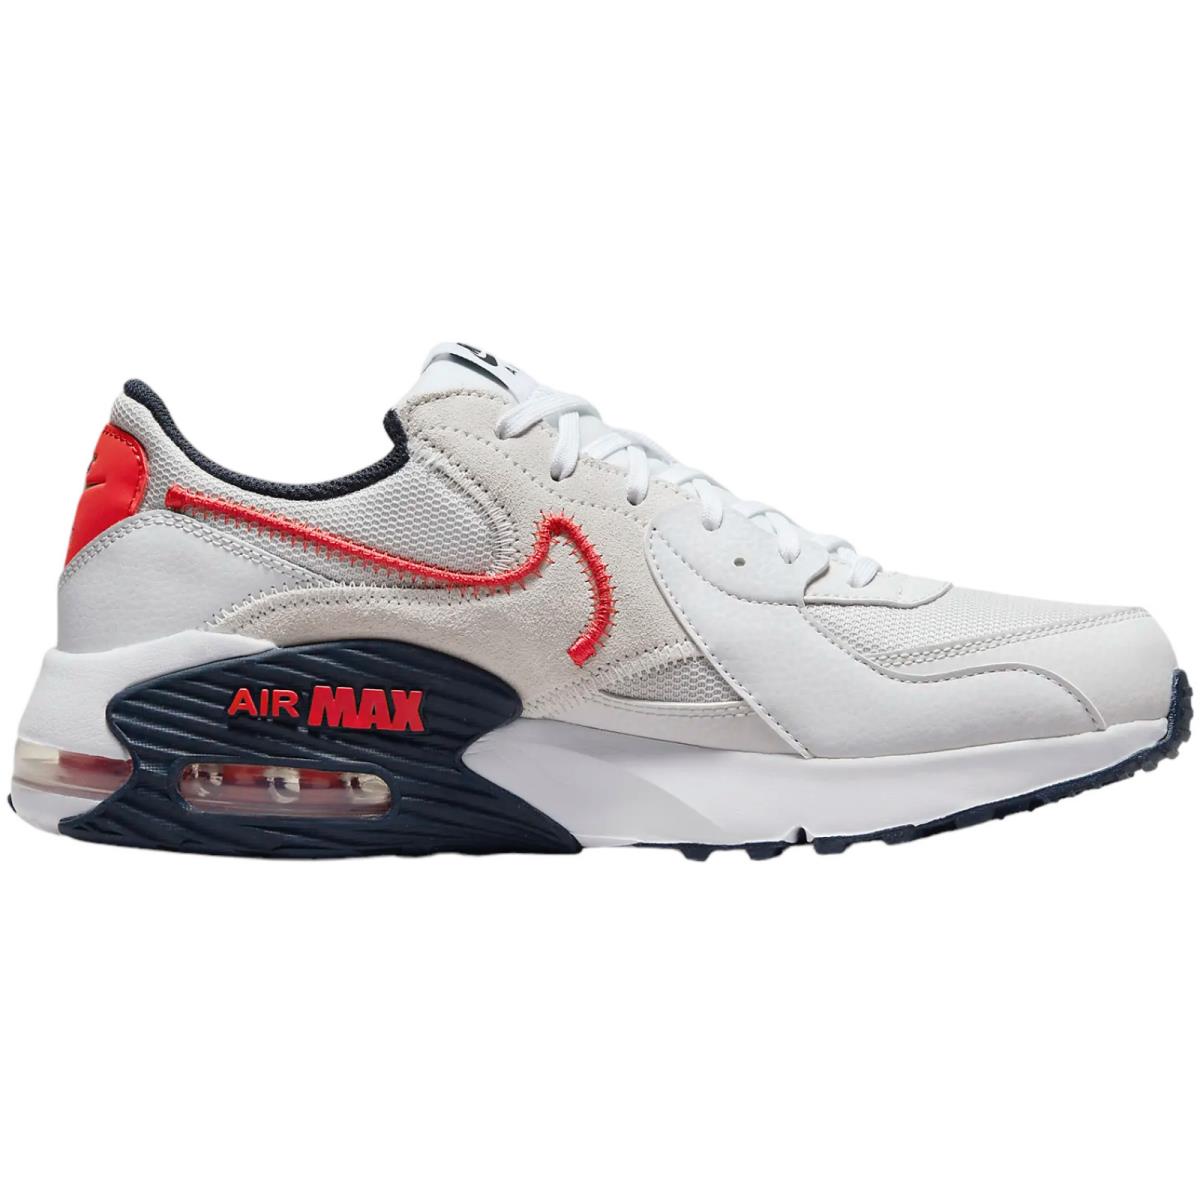 Nike Air Max Excee Men`s Casual Shoes All Colors US Sizes 7-14 Photon Dust/Dark Obsidian/White/Track Red